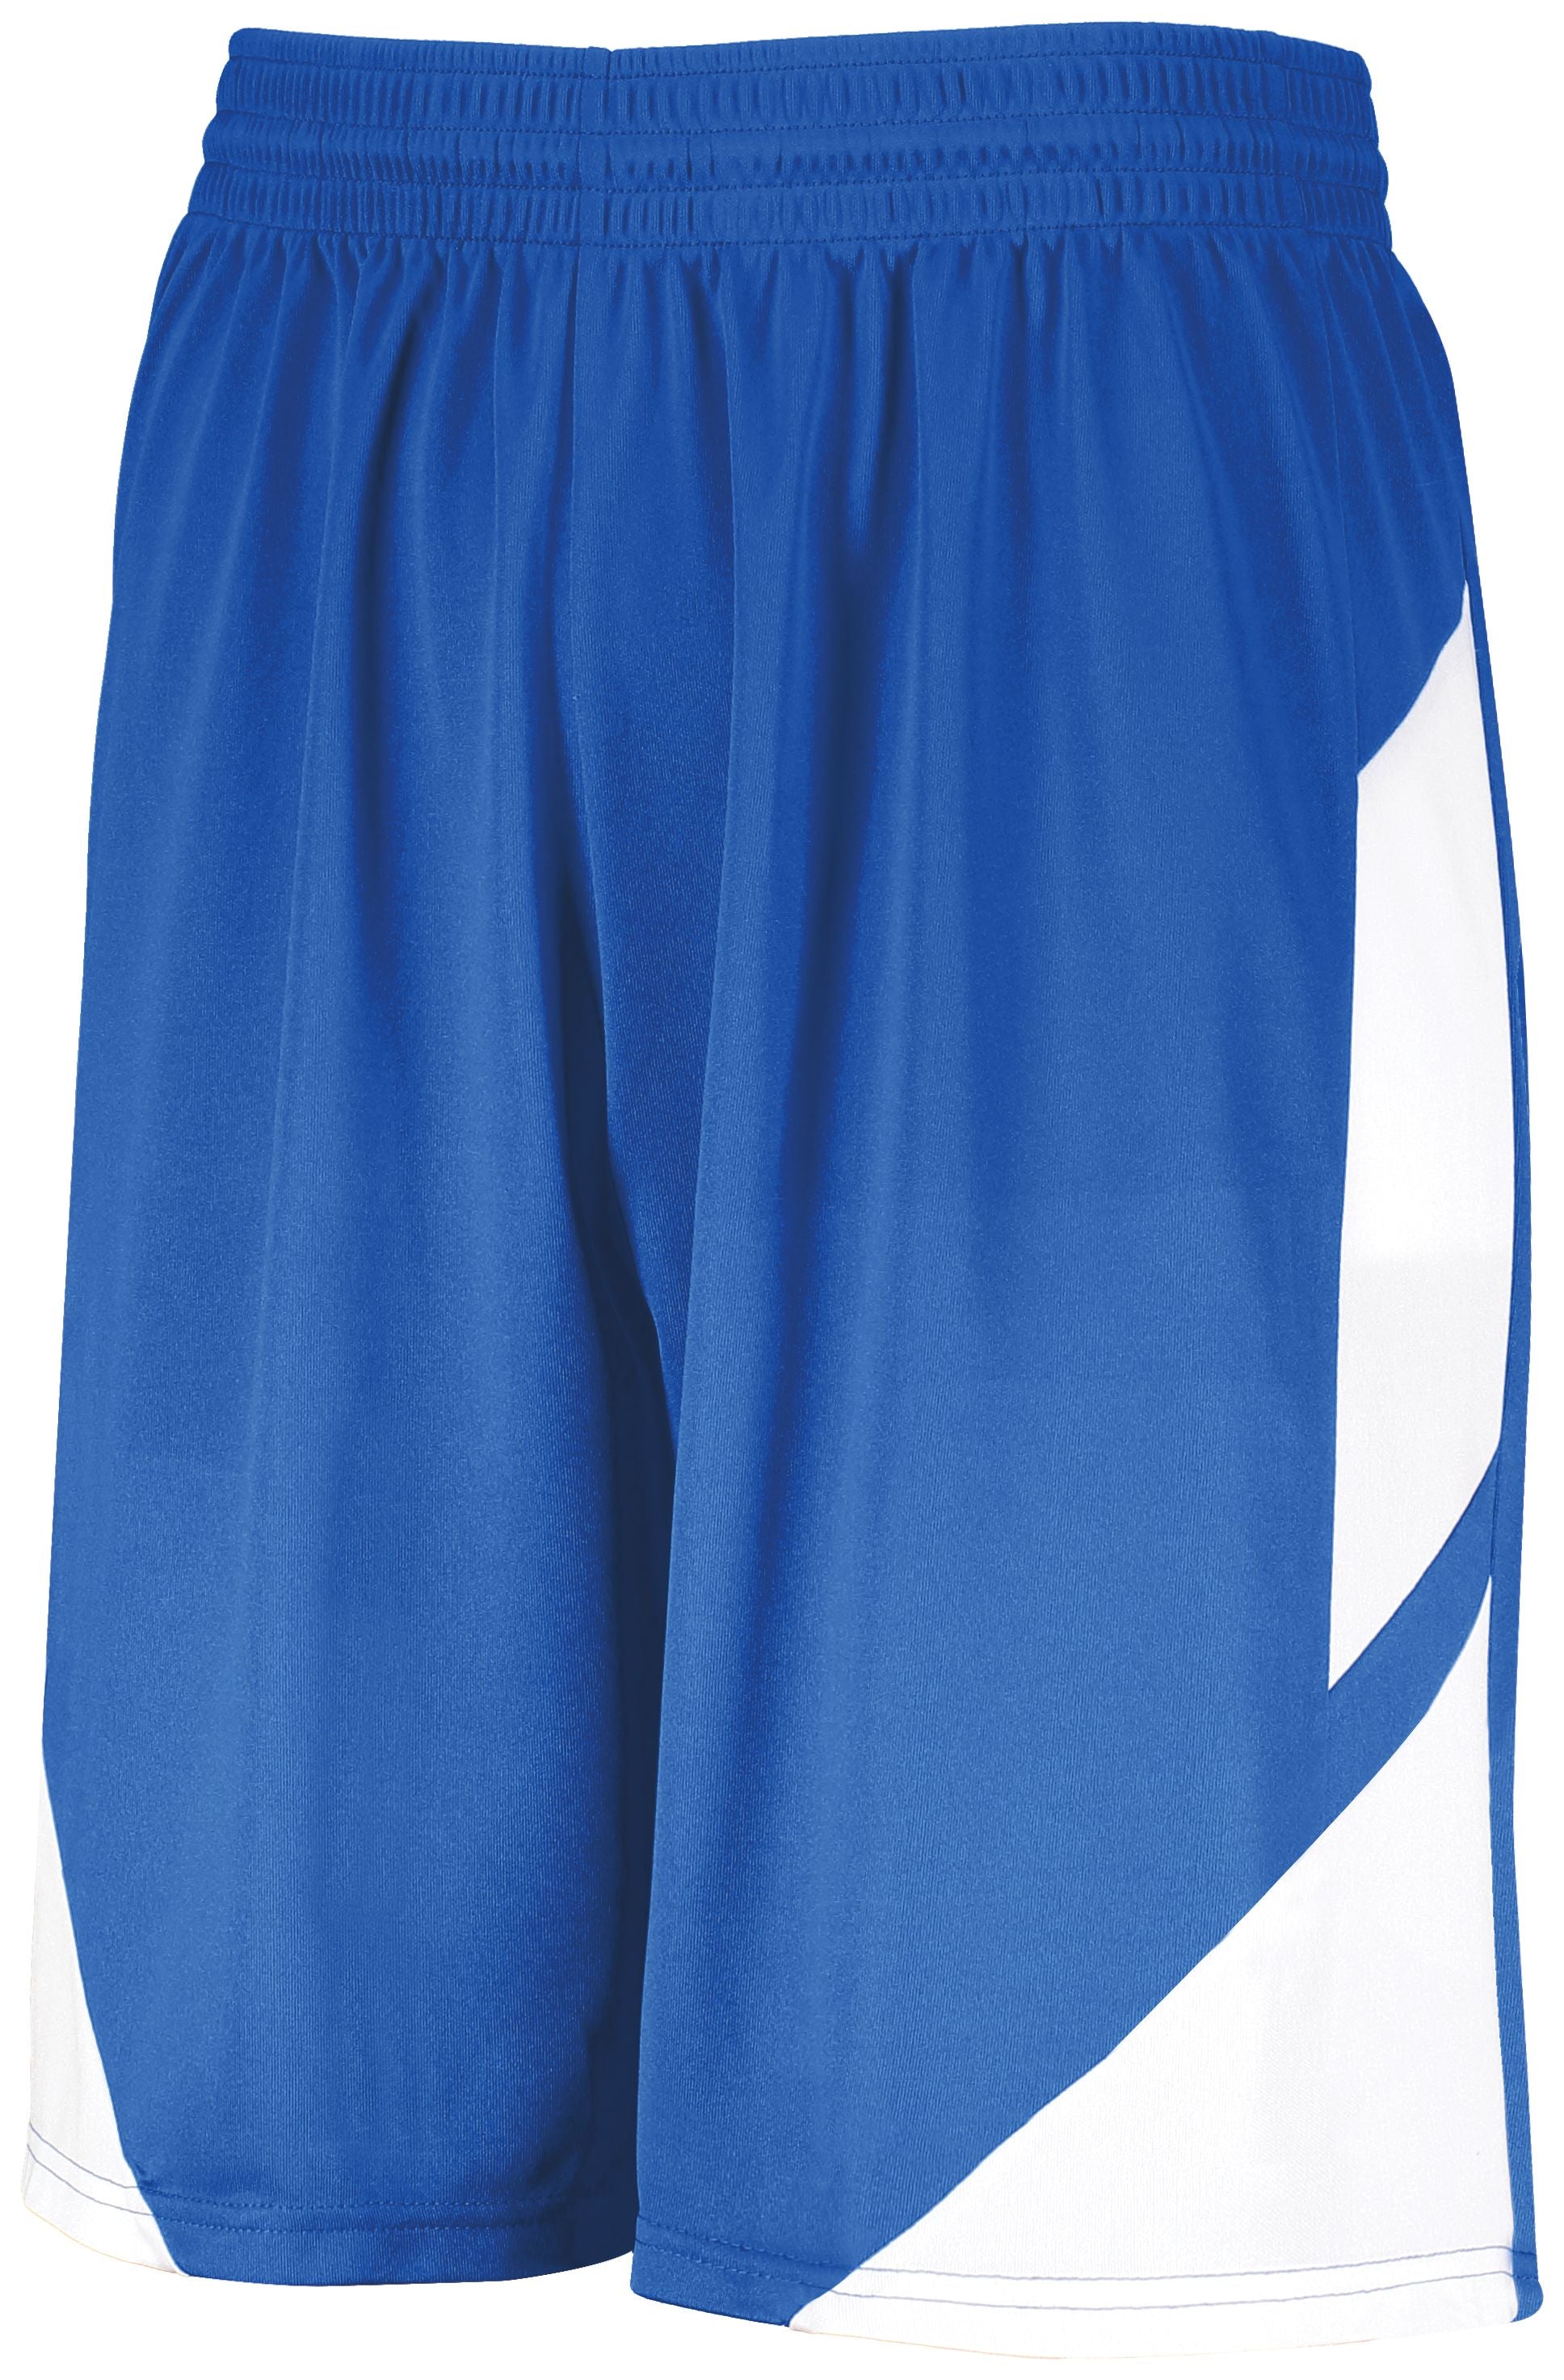 Augusta Sportswear Step-Back Basketball Shorts in Royal/White  -Part of the Adult, Adult-Shorts, Augusta-Products, Basketball, All-Sports, All-Sports-1 product lines at KanaleyCreations.com